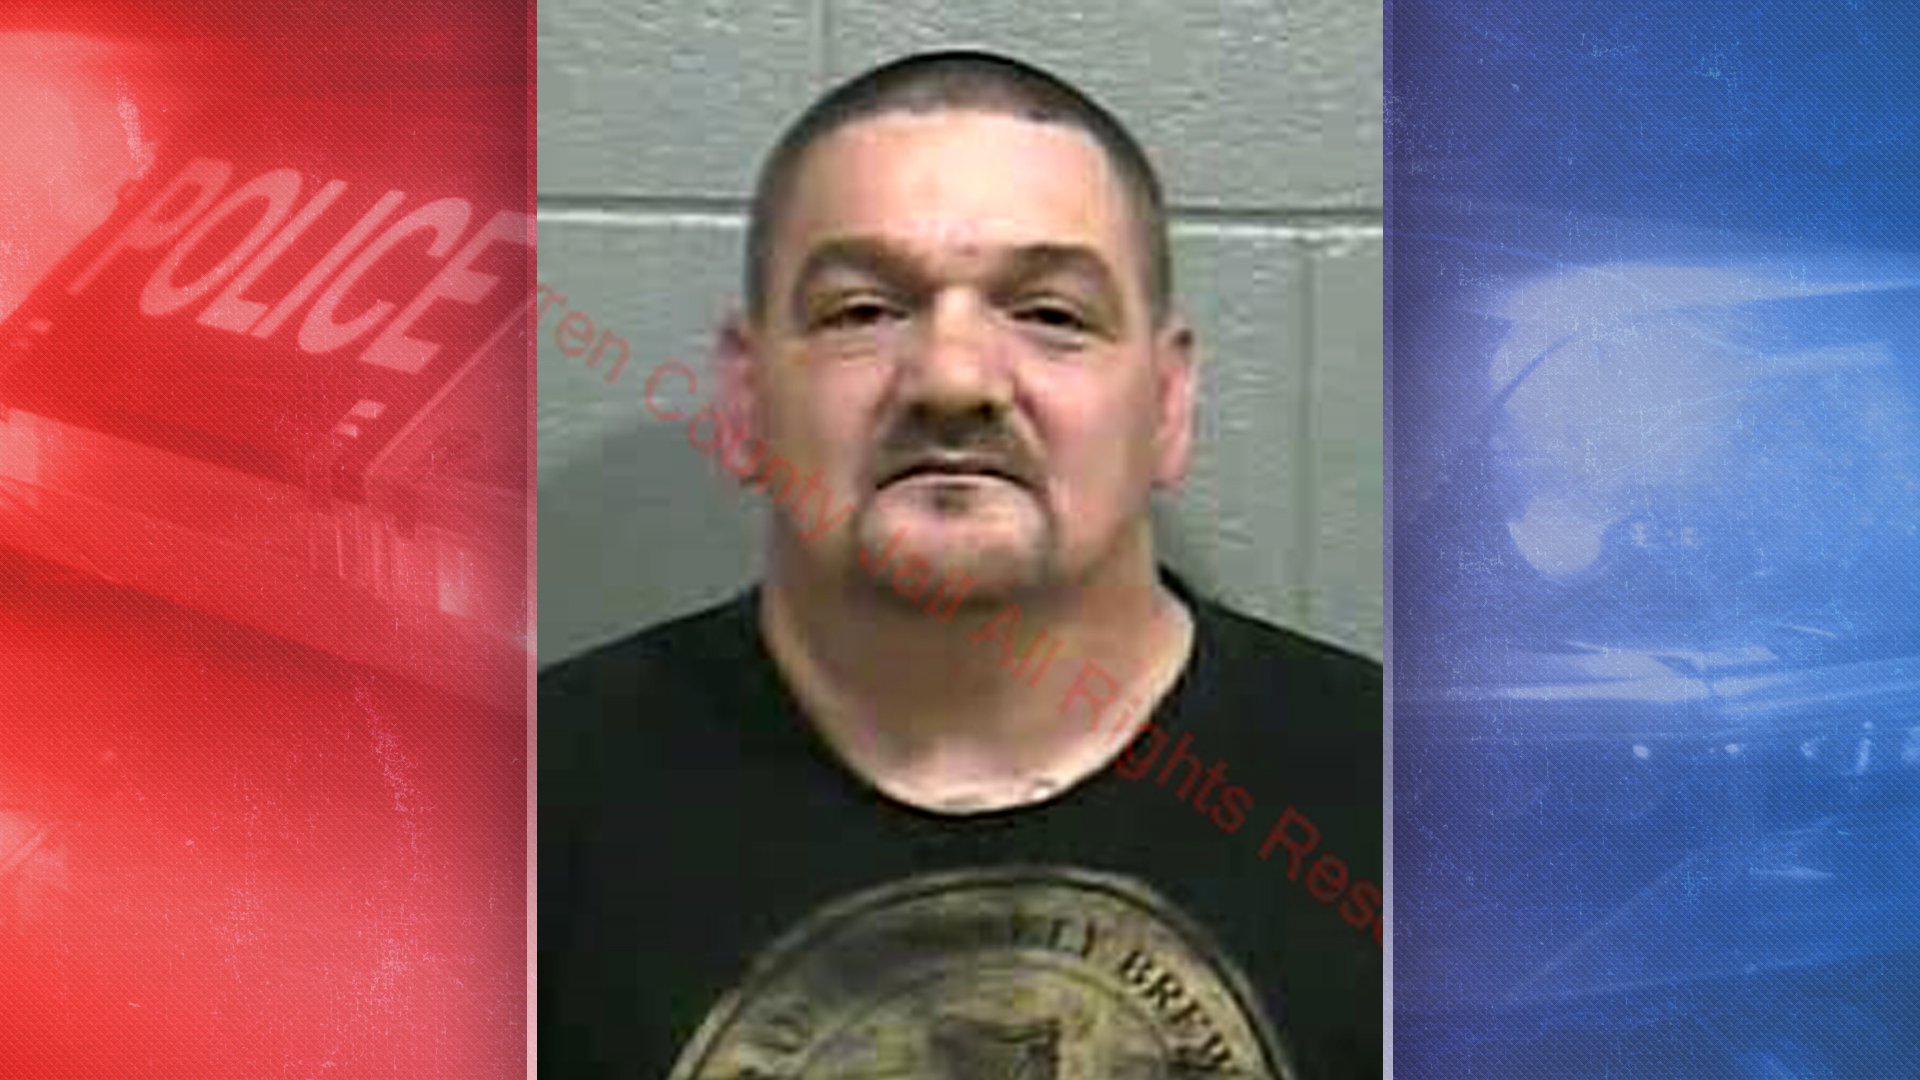 Hart County Jail employee arrested WNKY News 40 Television